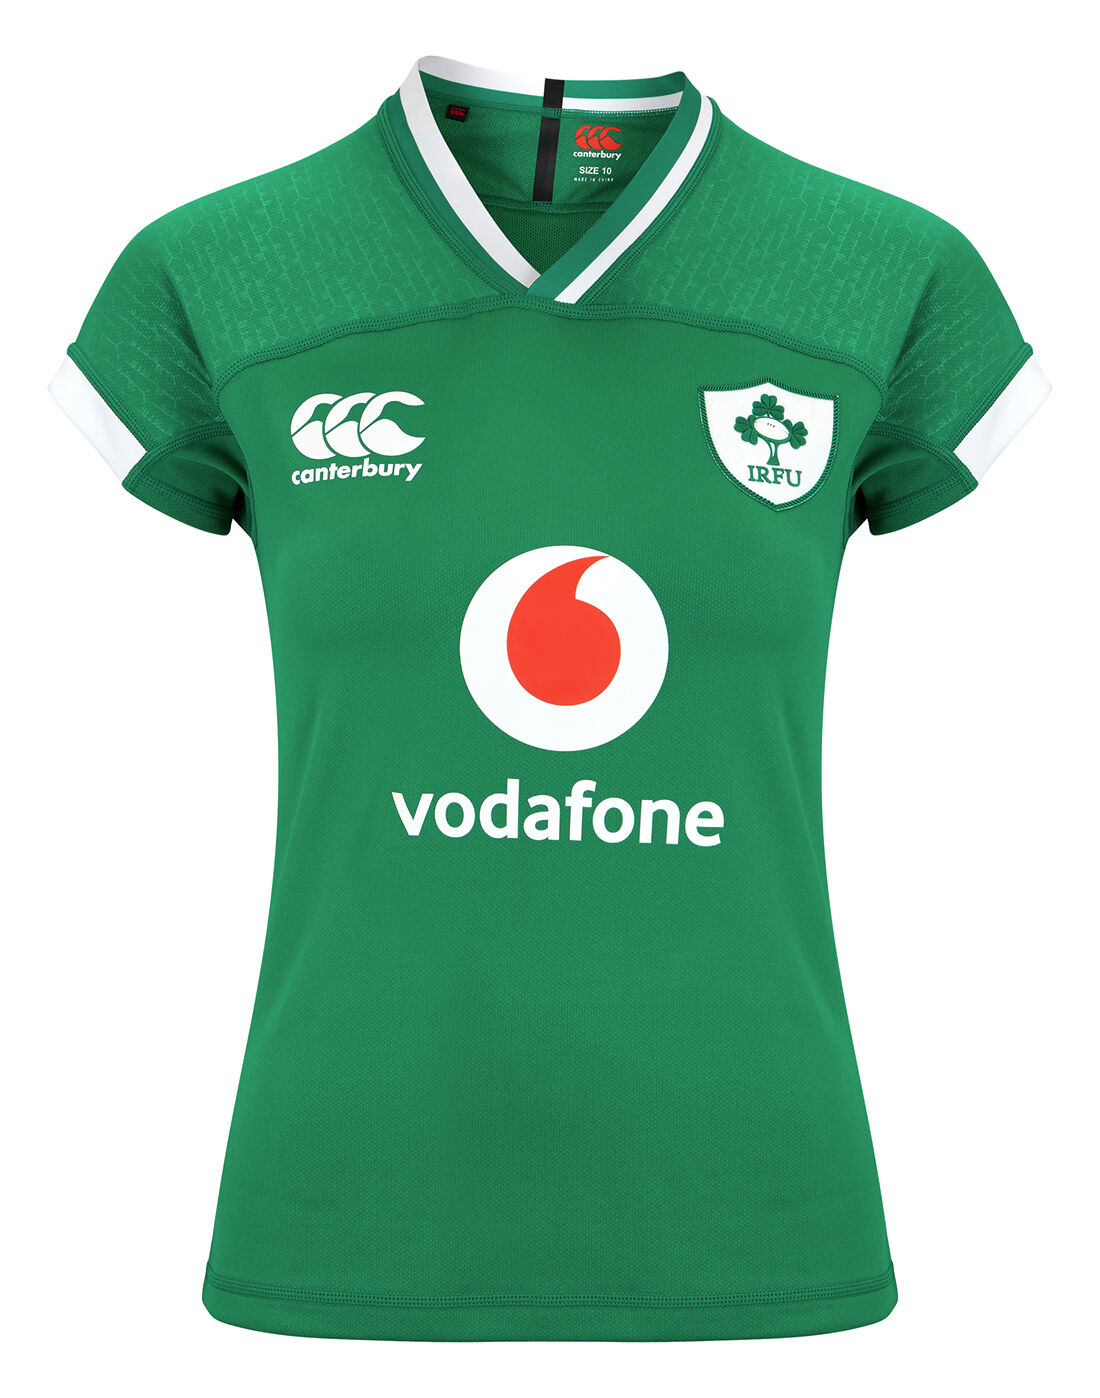 ladies rugby jersey